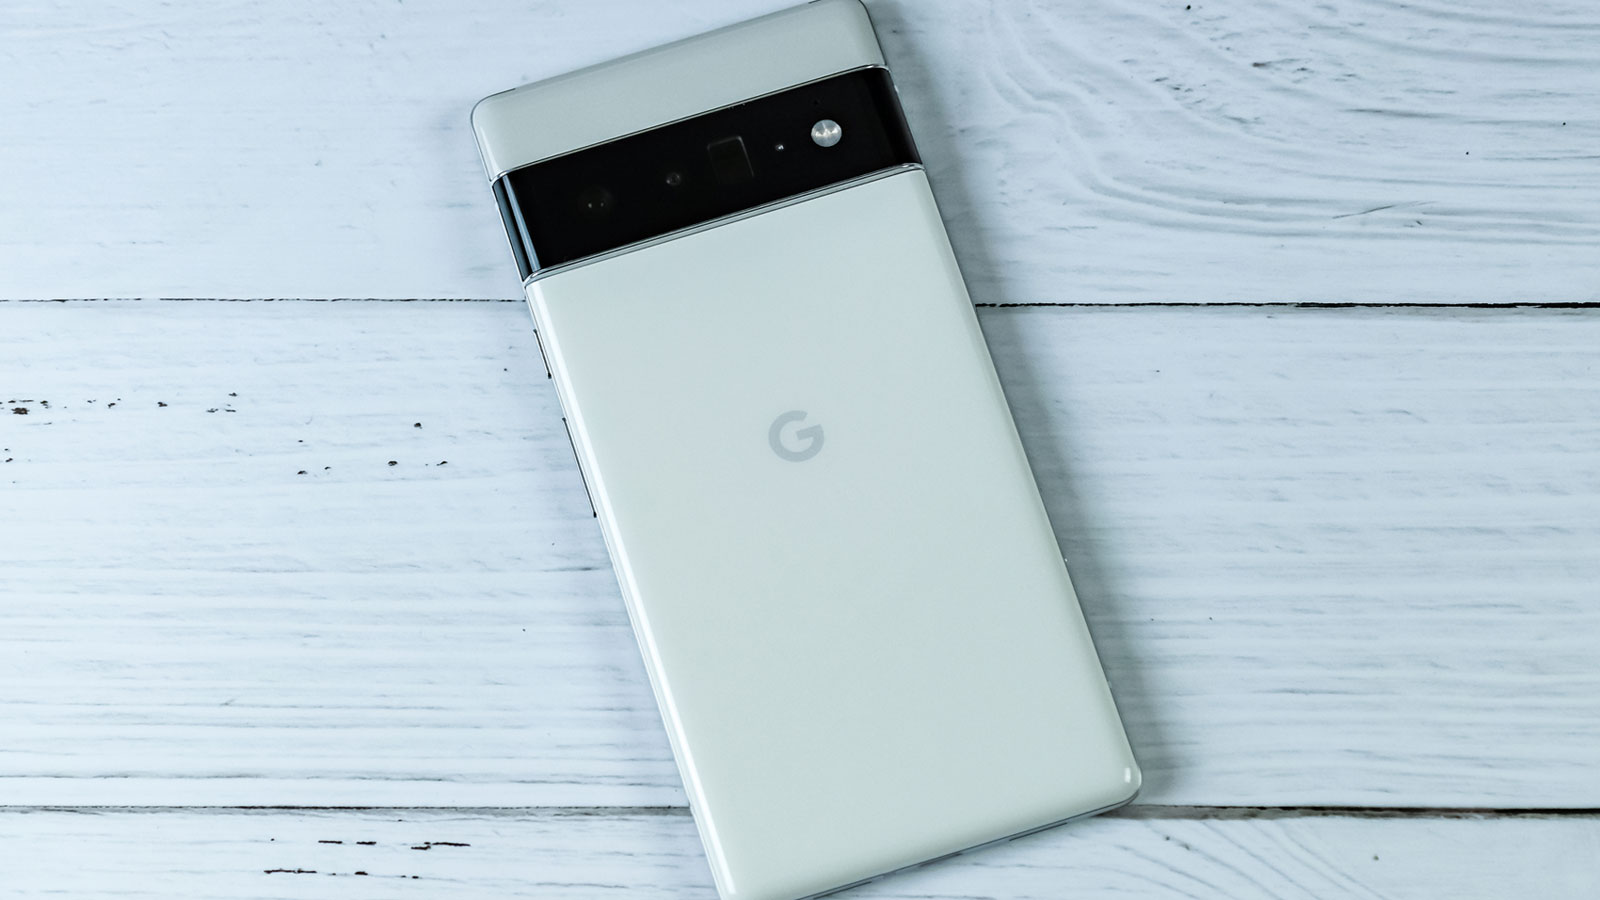 Google Pixel flaw allowed recovery of redacted, cropped images